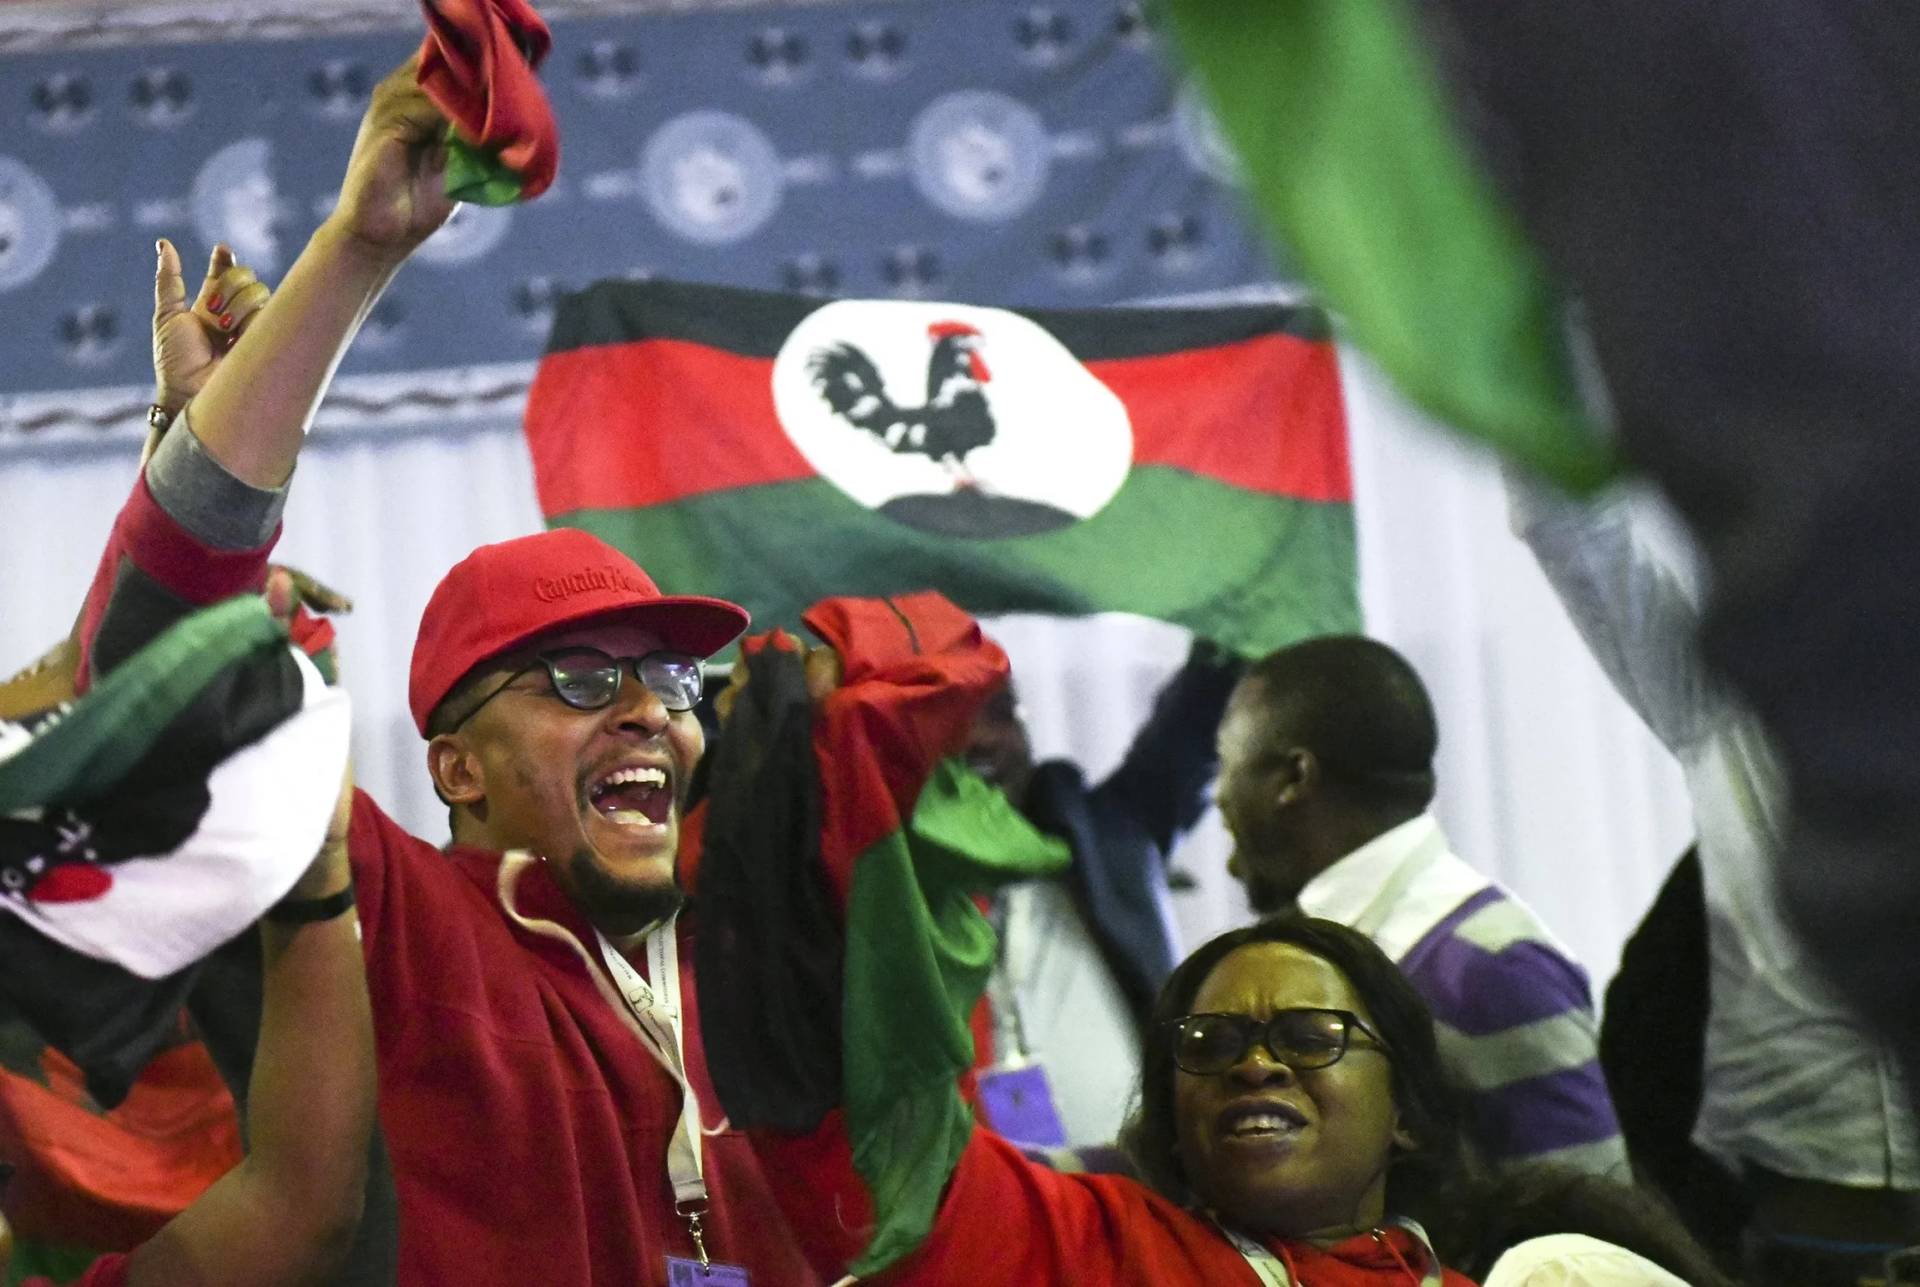 Malawi Congress Party supporters celebrate after party leader Lazarus Chakwera was announced the winner of the election rerun in Blantyre, Malawi, Saturday, June 27, 2020. (Credit: Thoko Chikondi/AP.)